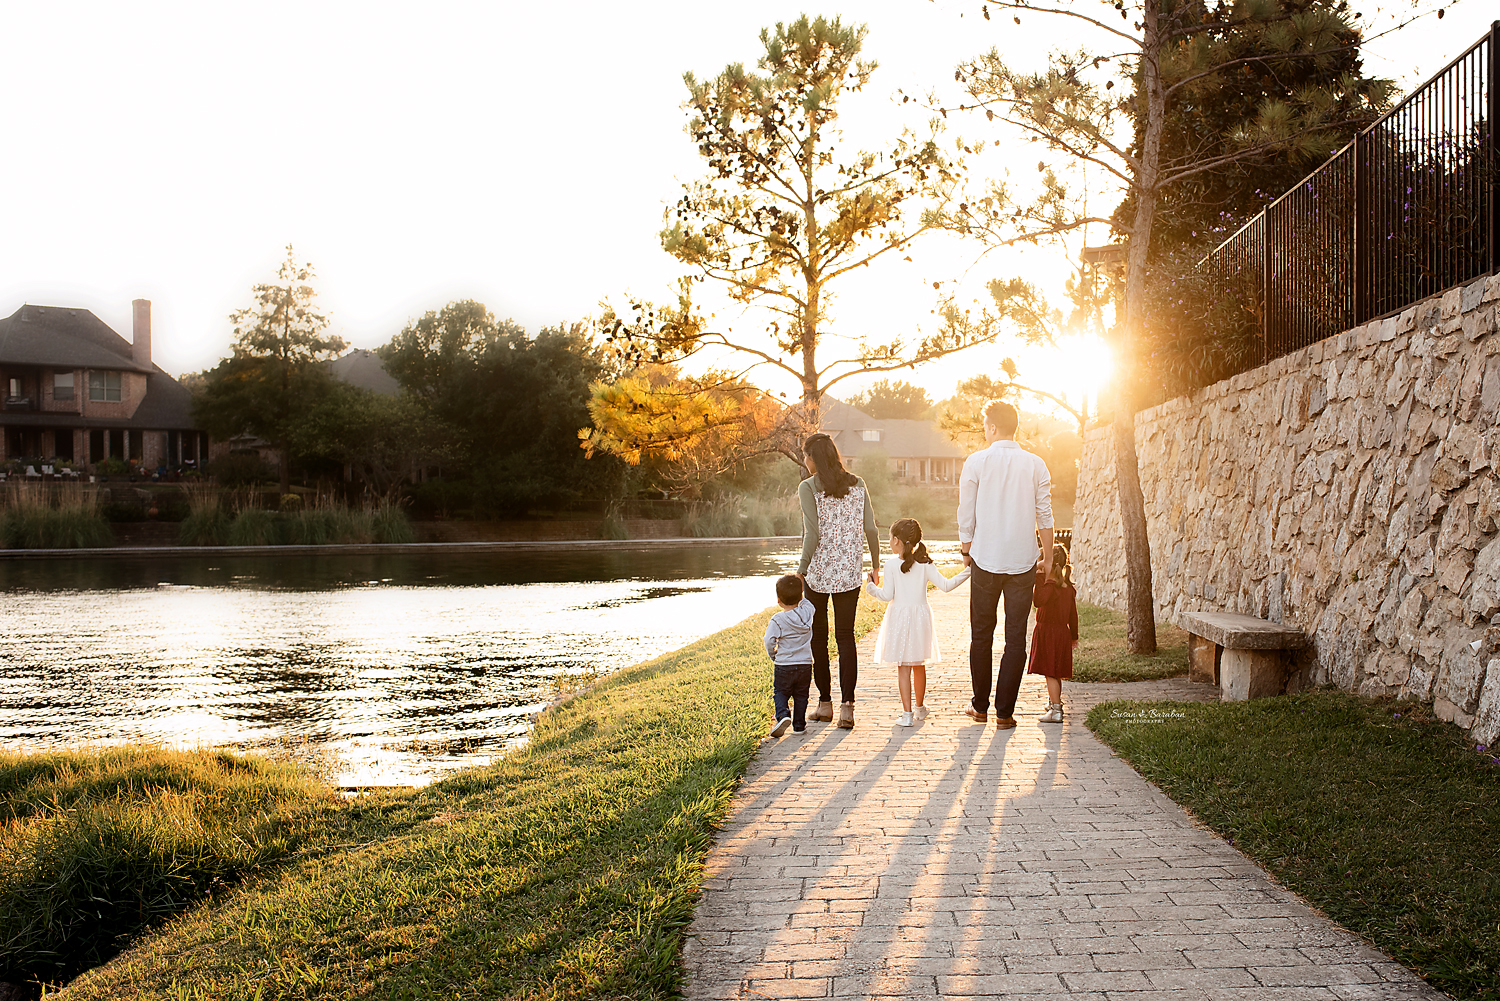 Family of 5 walking along the water's edge as the sun sets at Adriatica Village.